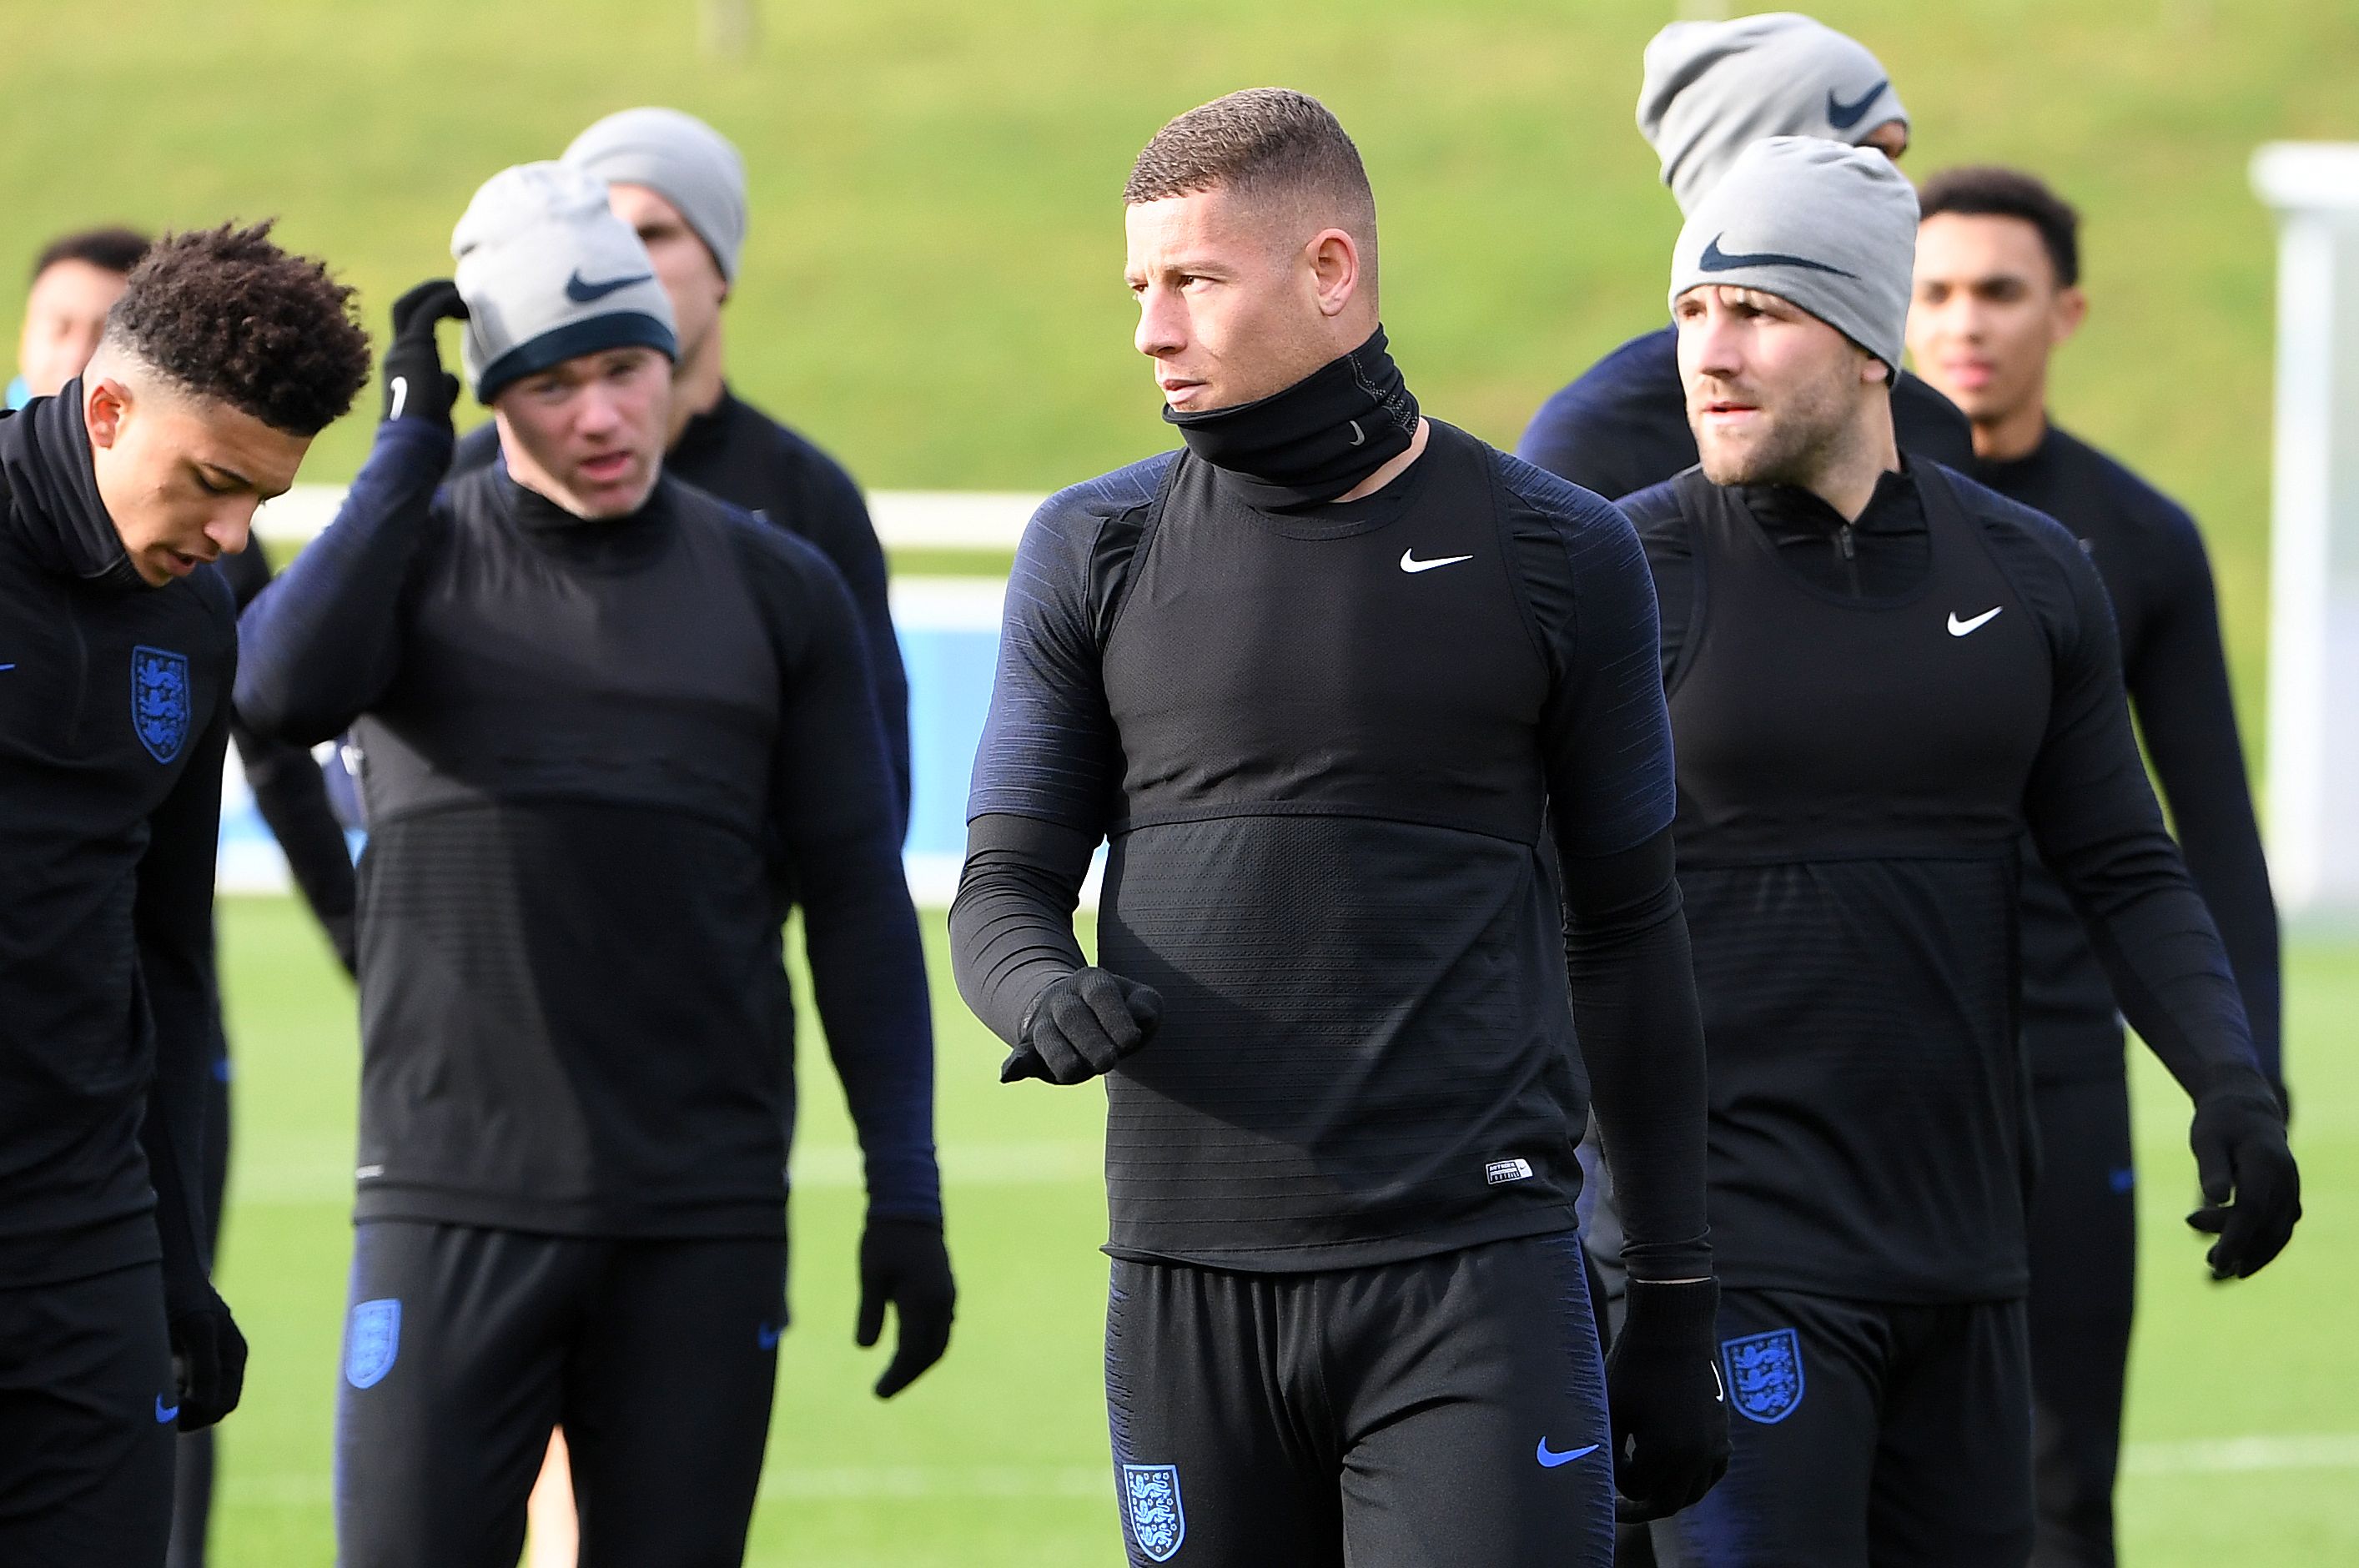 England's striker Wayne Rooney (2L) and England's midfielder Ross Barkley (C) attend a England team training session at St George's Park in Burton-on-Trent, central England on November 14, 2018, ahead of their international friendly football match against the USA on November 15. (Photo by Paul ELLIS / AFP) / NOT FOR MARKETING OR ADVERTISING USE / RESTRICTED TO EDITORIAL USE        (Photo credit should read PAUL ELLIS/AFP/Getty Images)